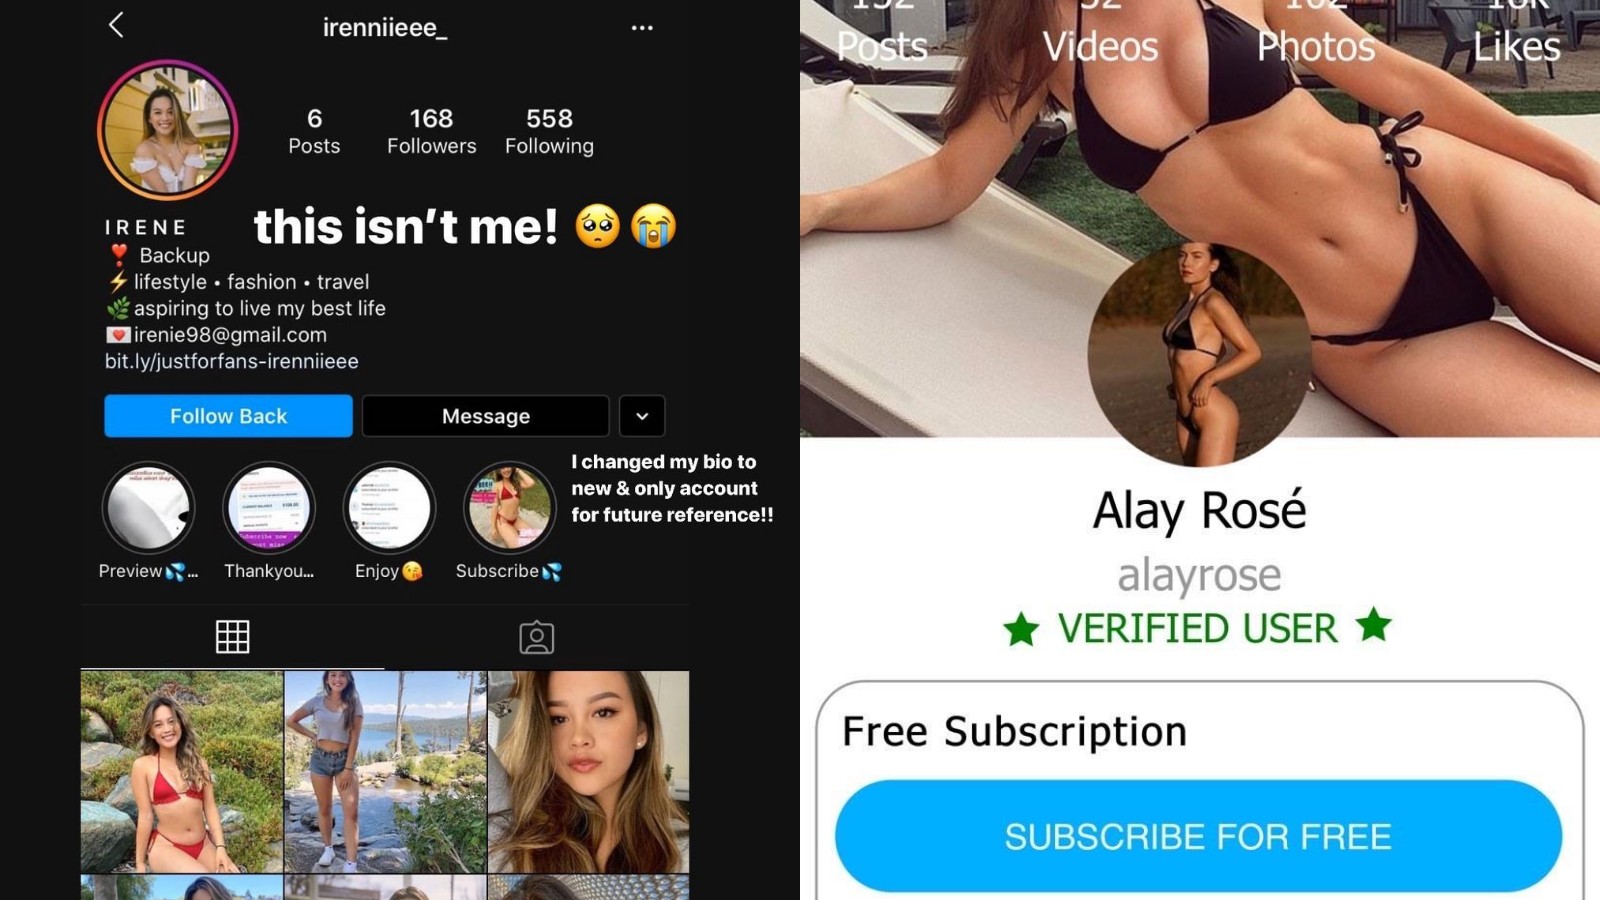 Family Nudists Xyz - Young People's Instagram Profiles Are Being Used for Fake Porn Accounts